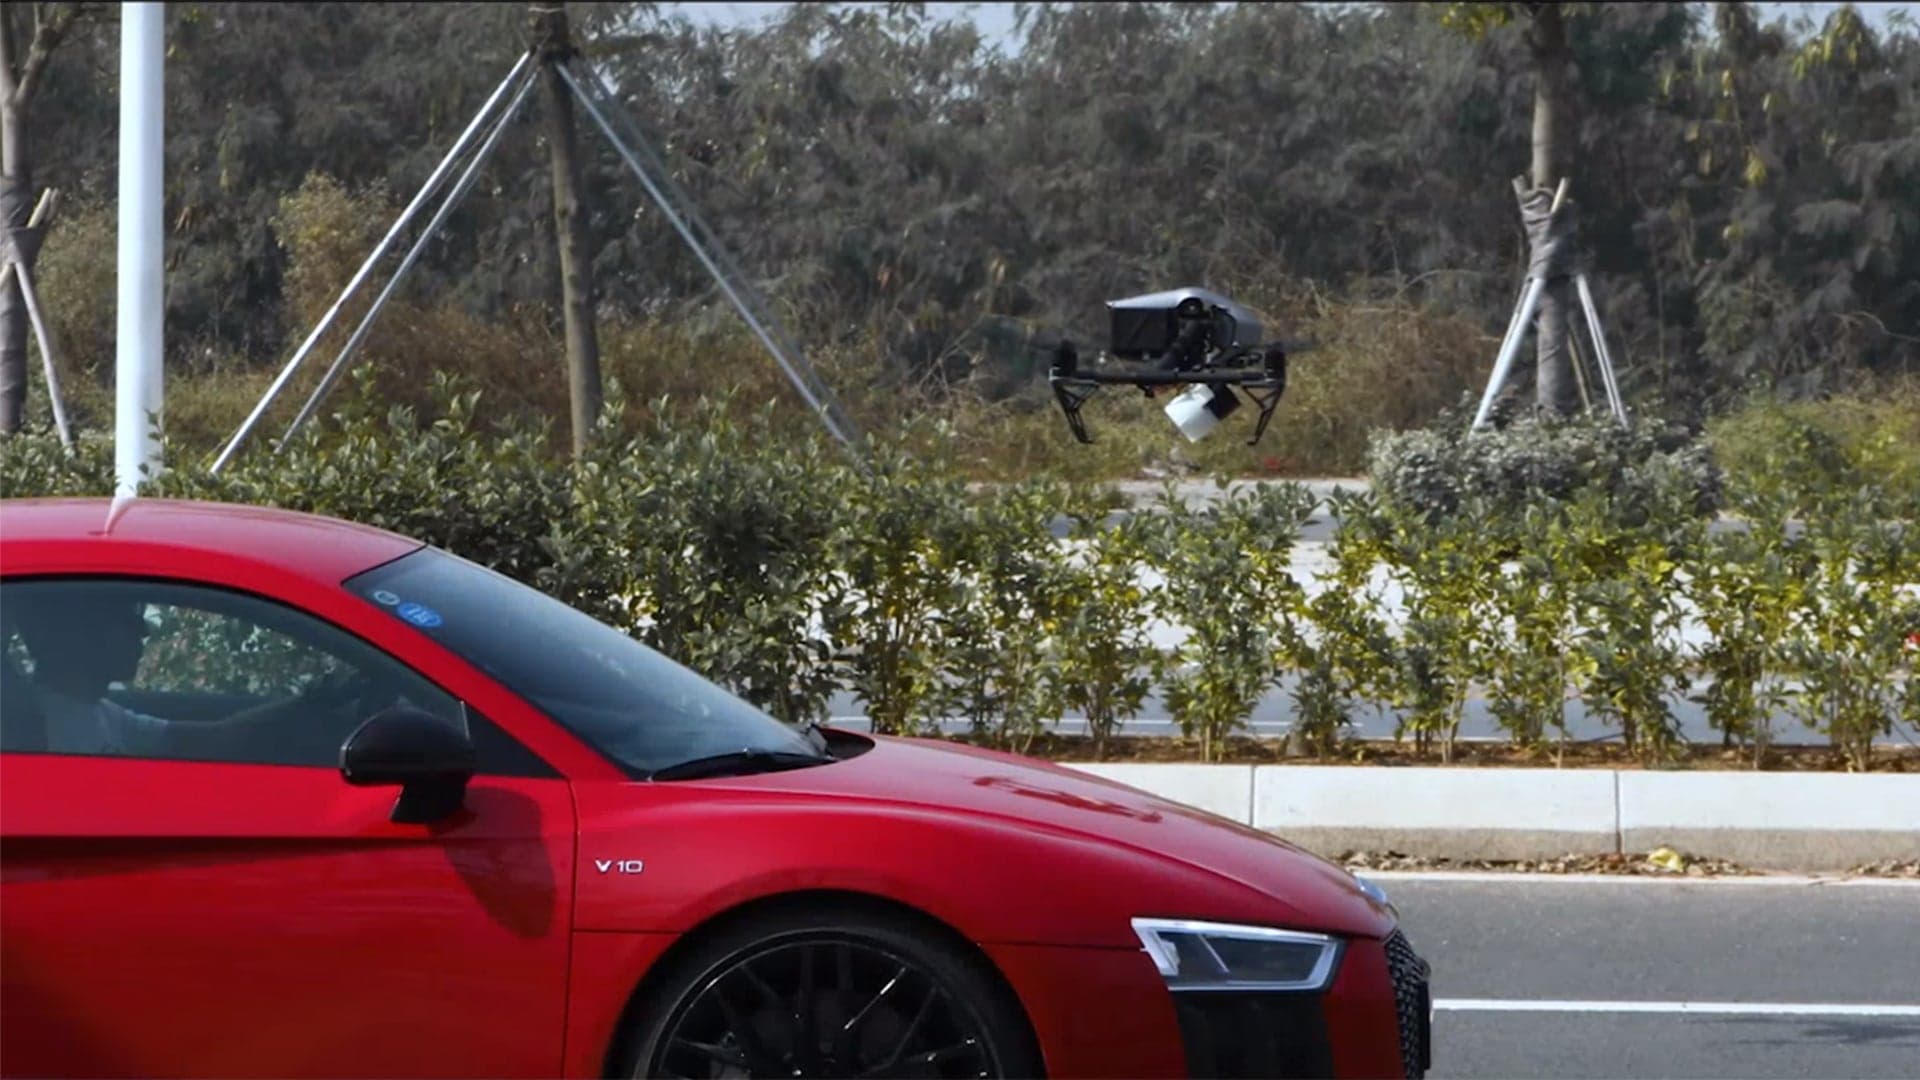 Is This Drone Faster Than an Audi R8?